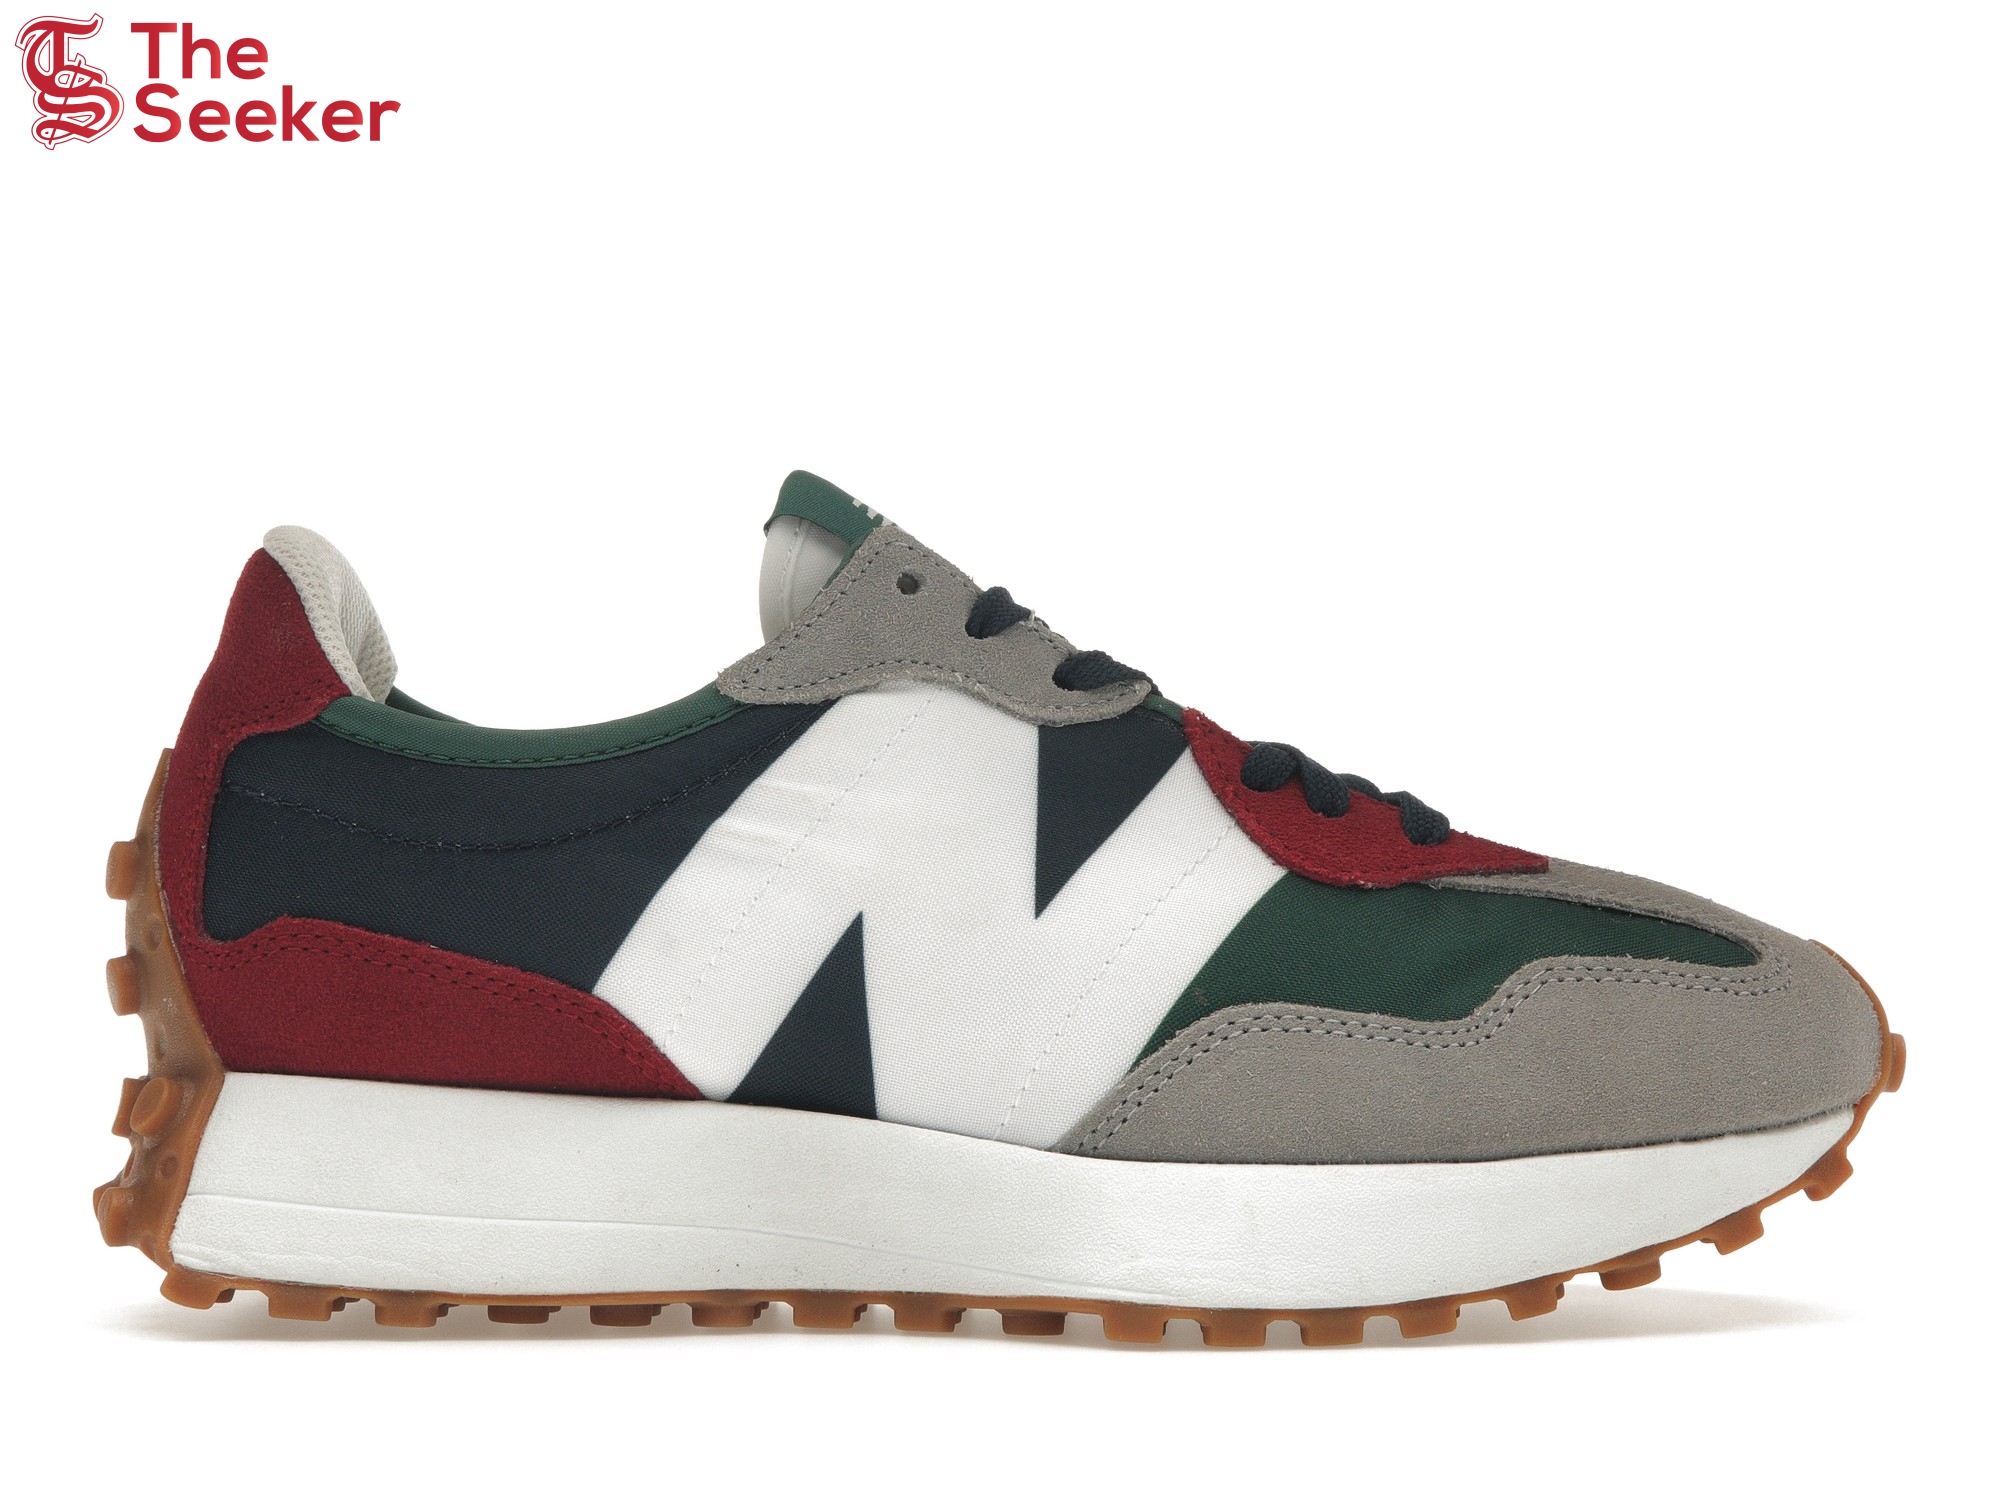 New Balance 327 Marblehead Team Forest Green